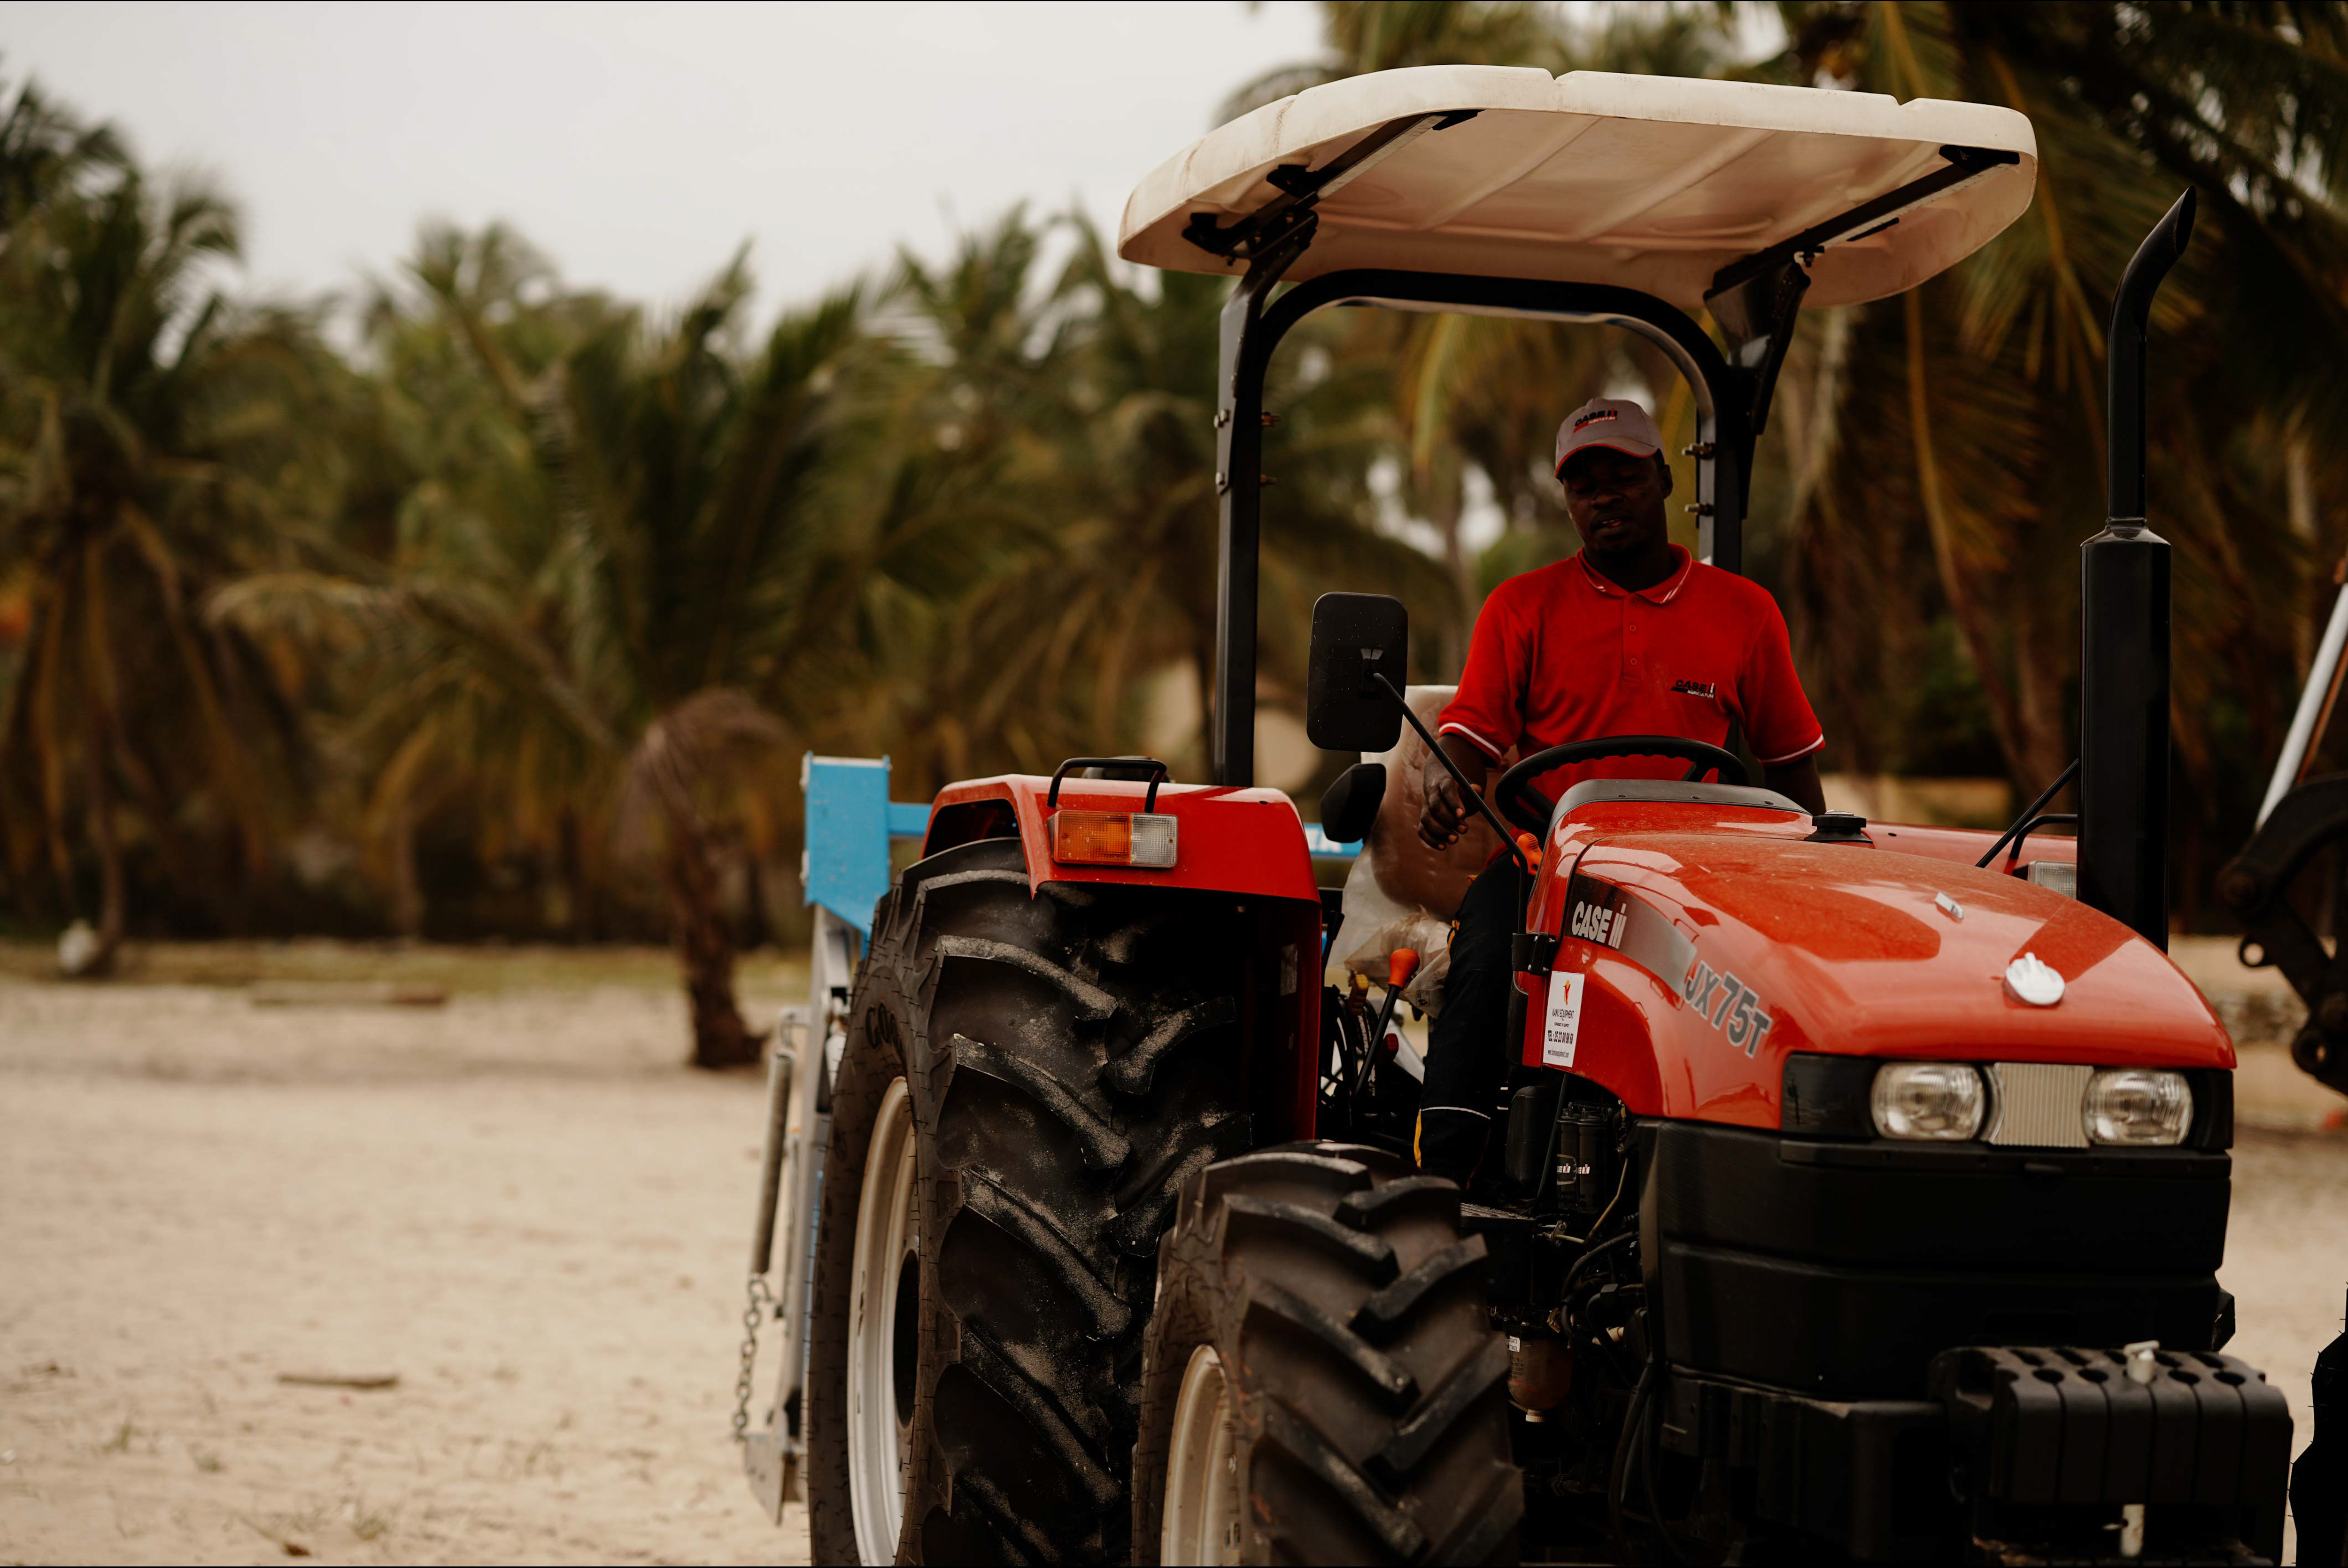 Case IH brings beach care project to Africa